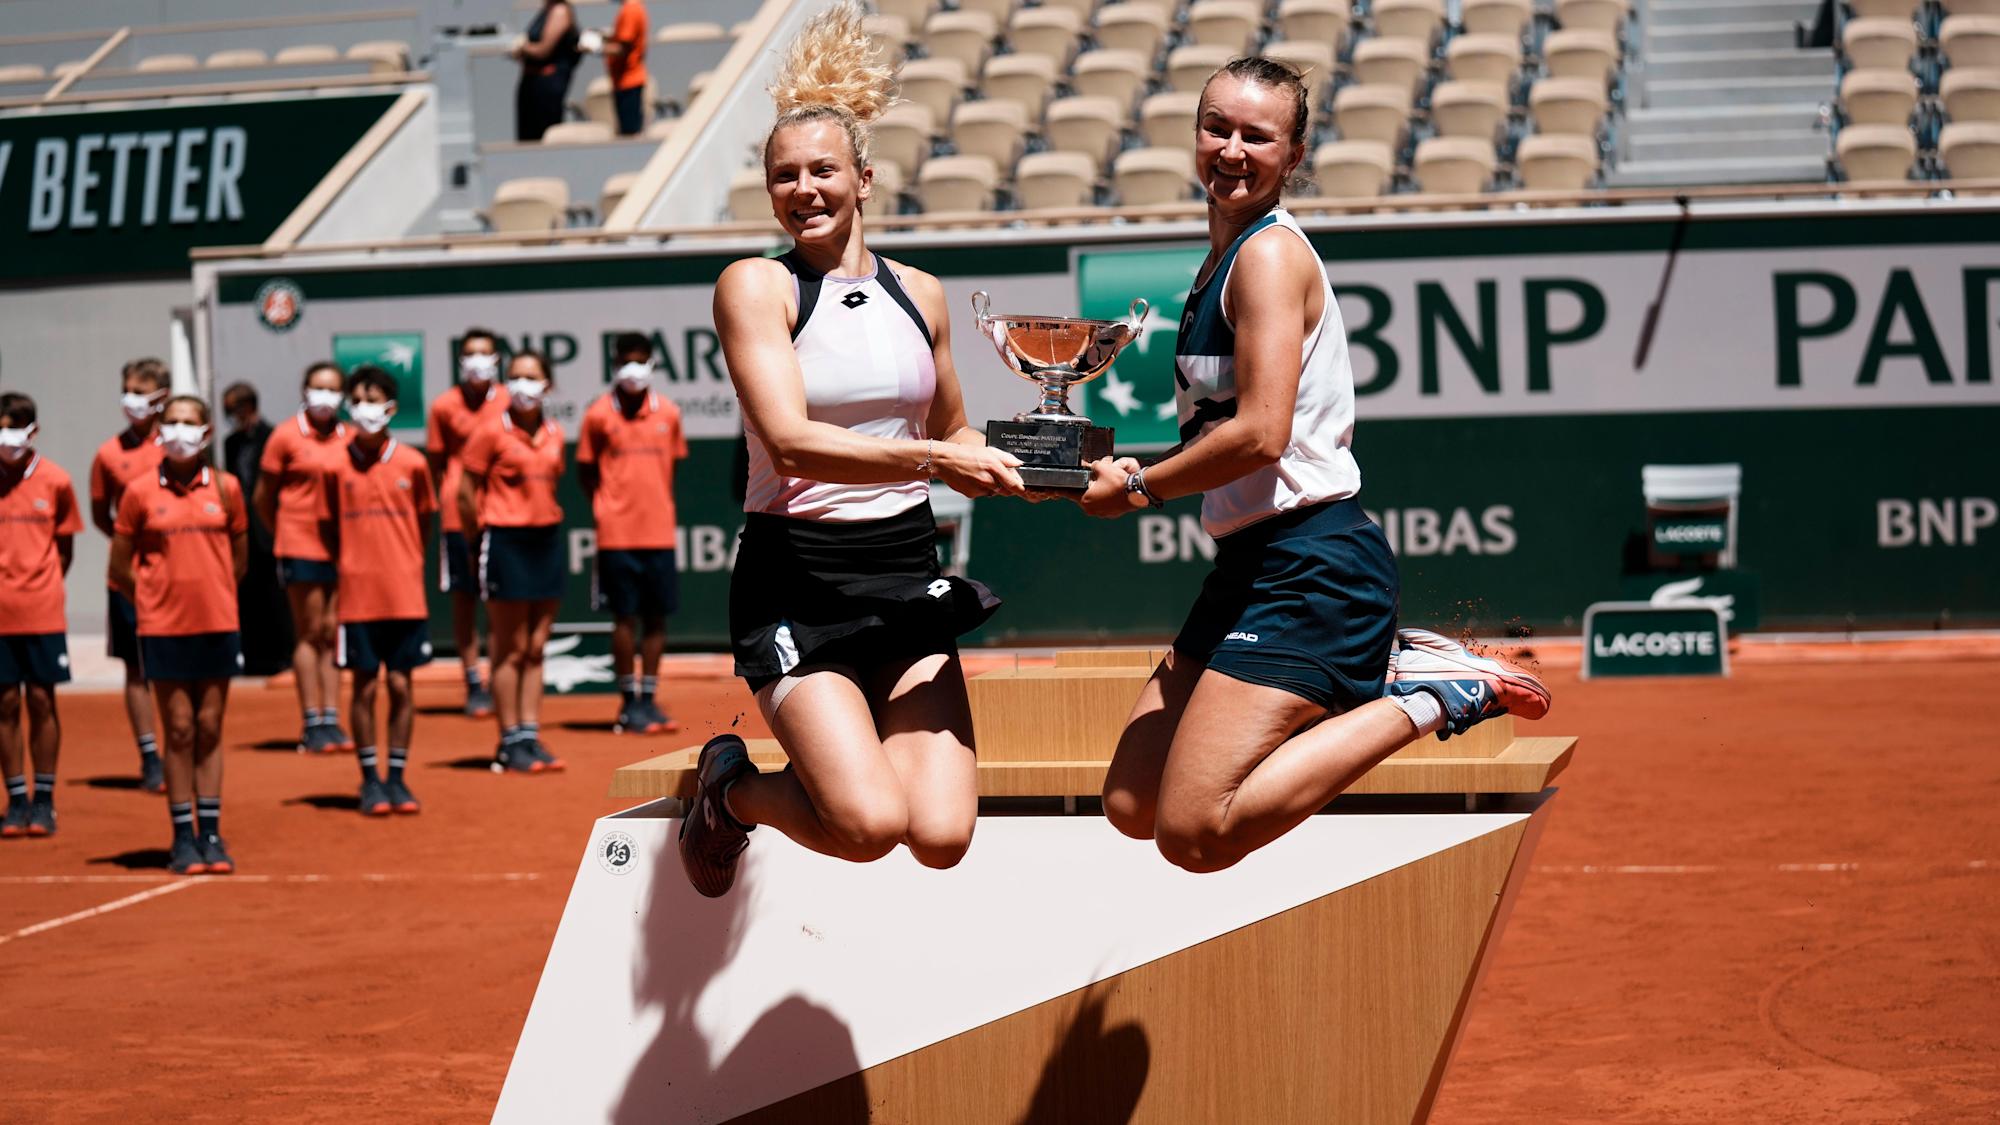 French Open Krejcikova Adds Women’s Doubles to Singles Title What's